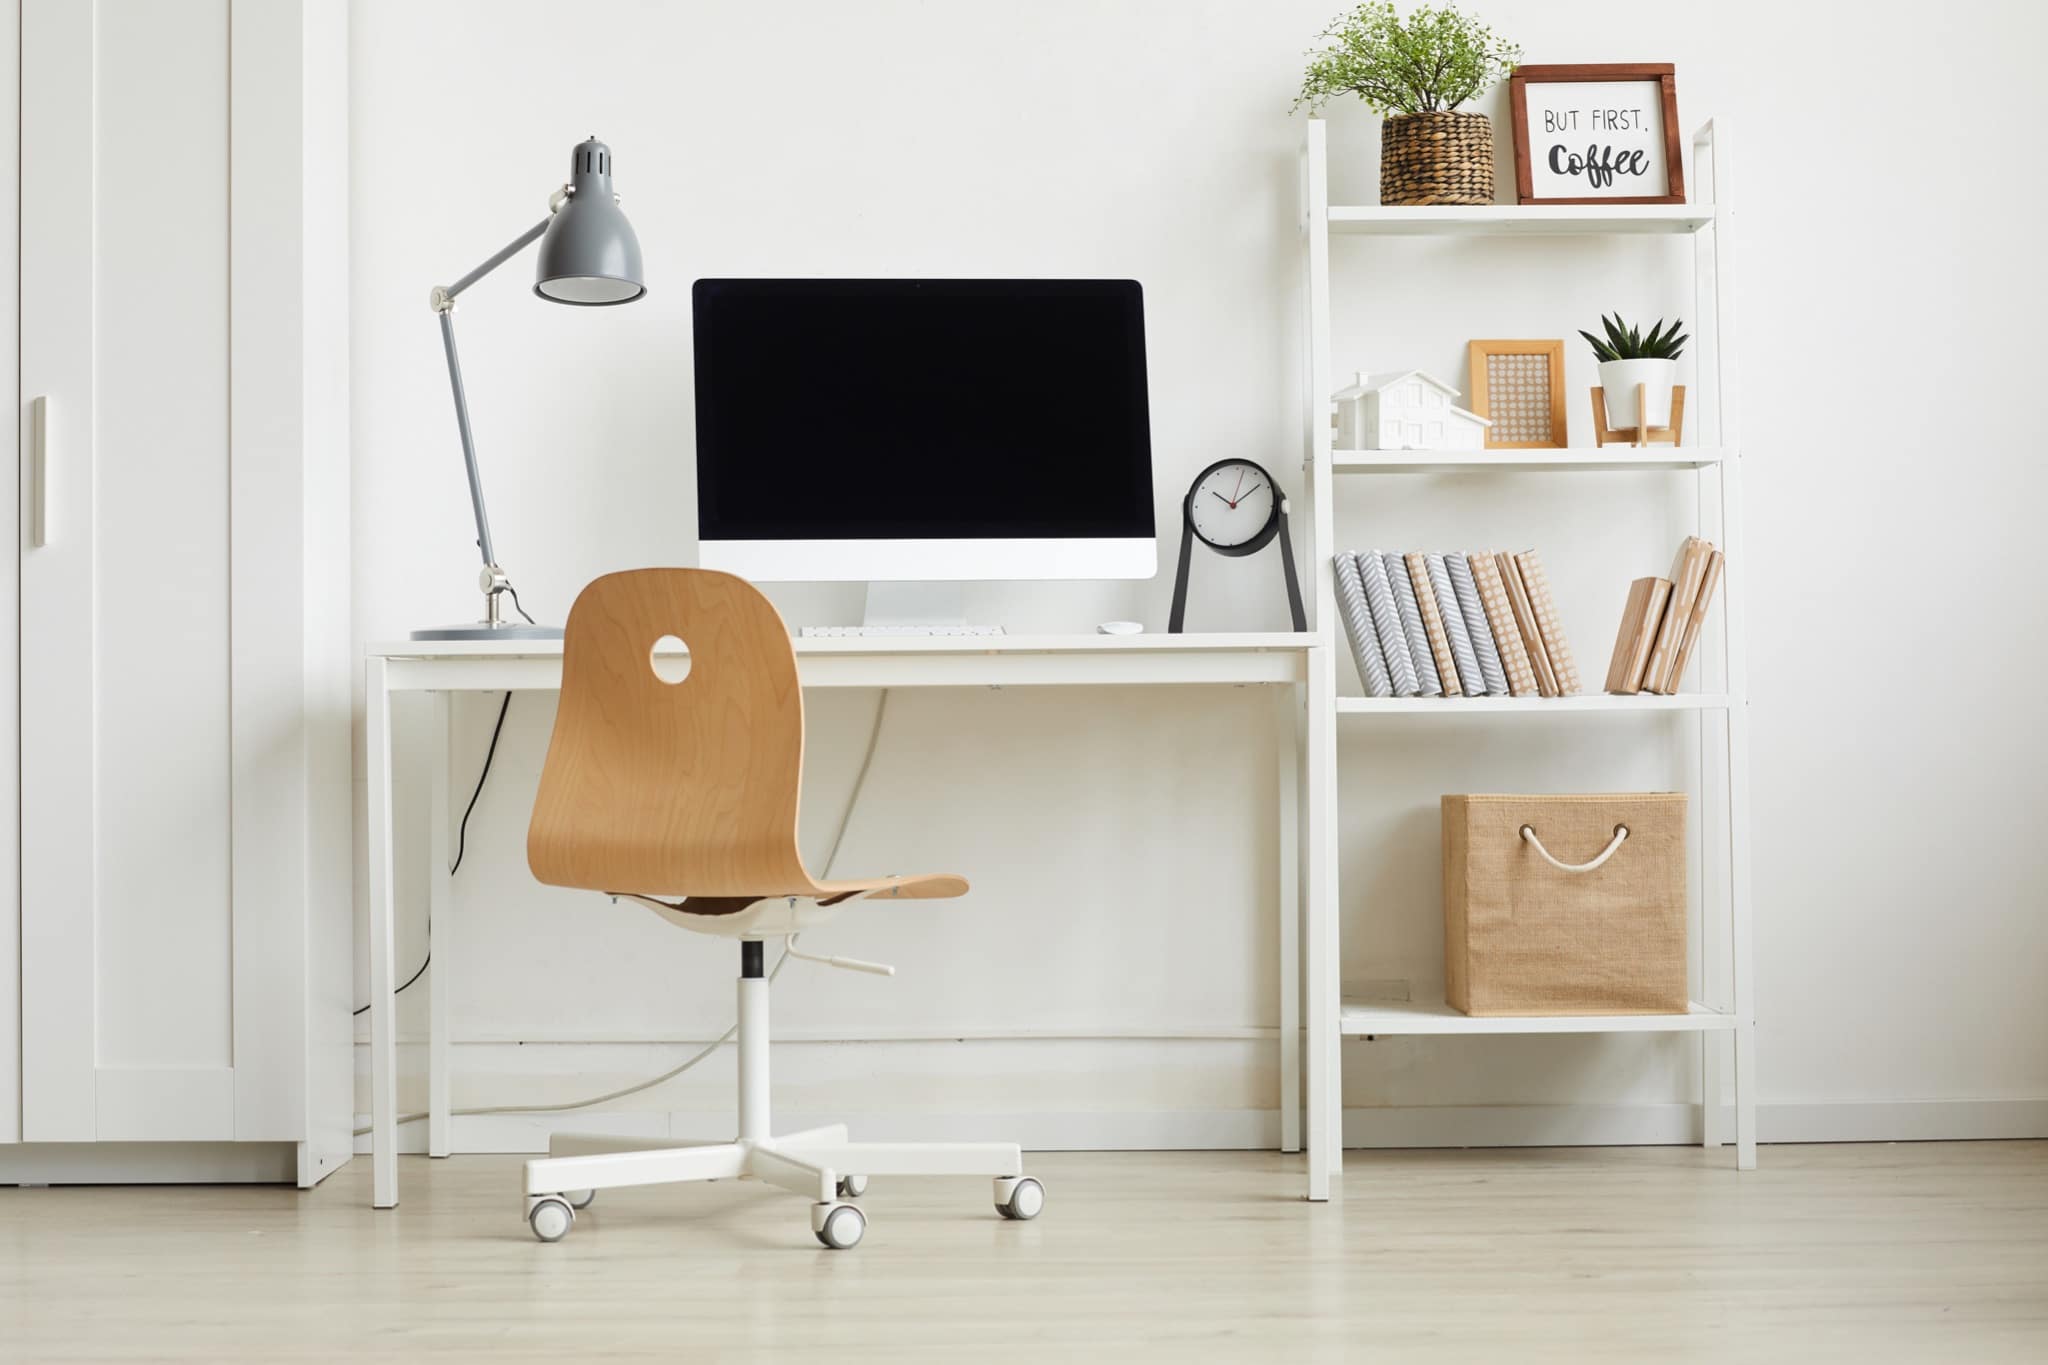 5 Tips for your home office space